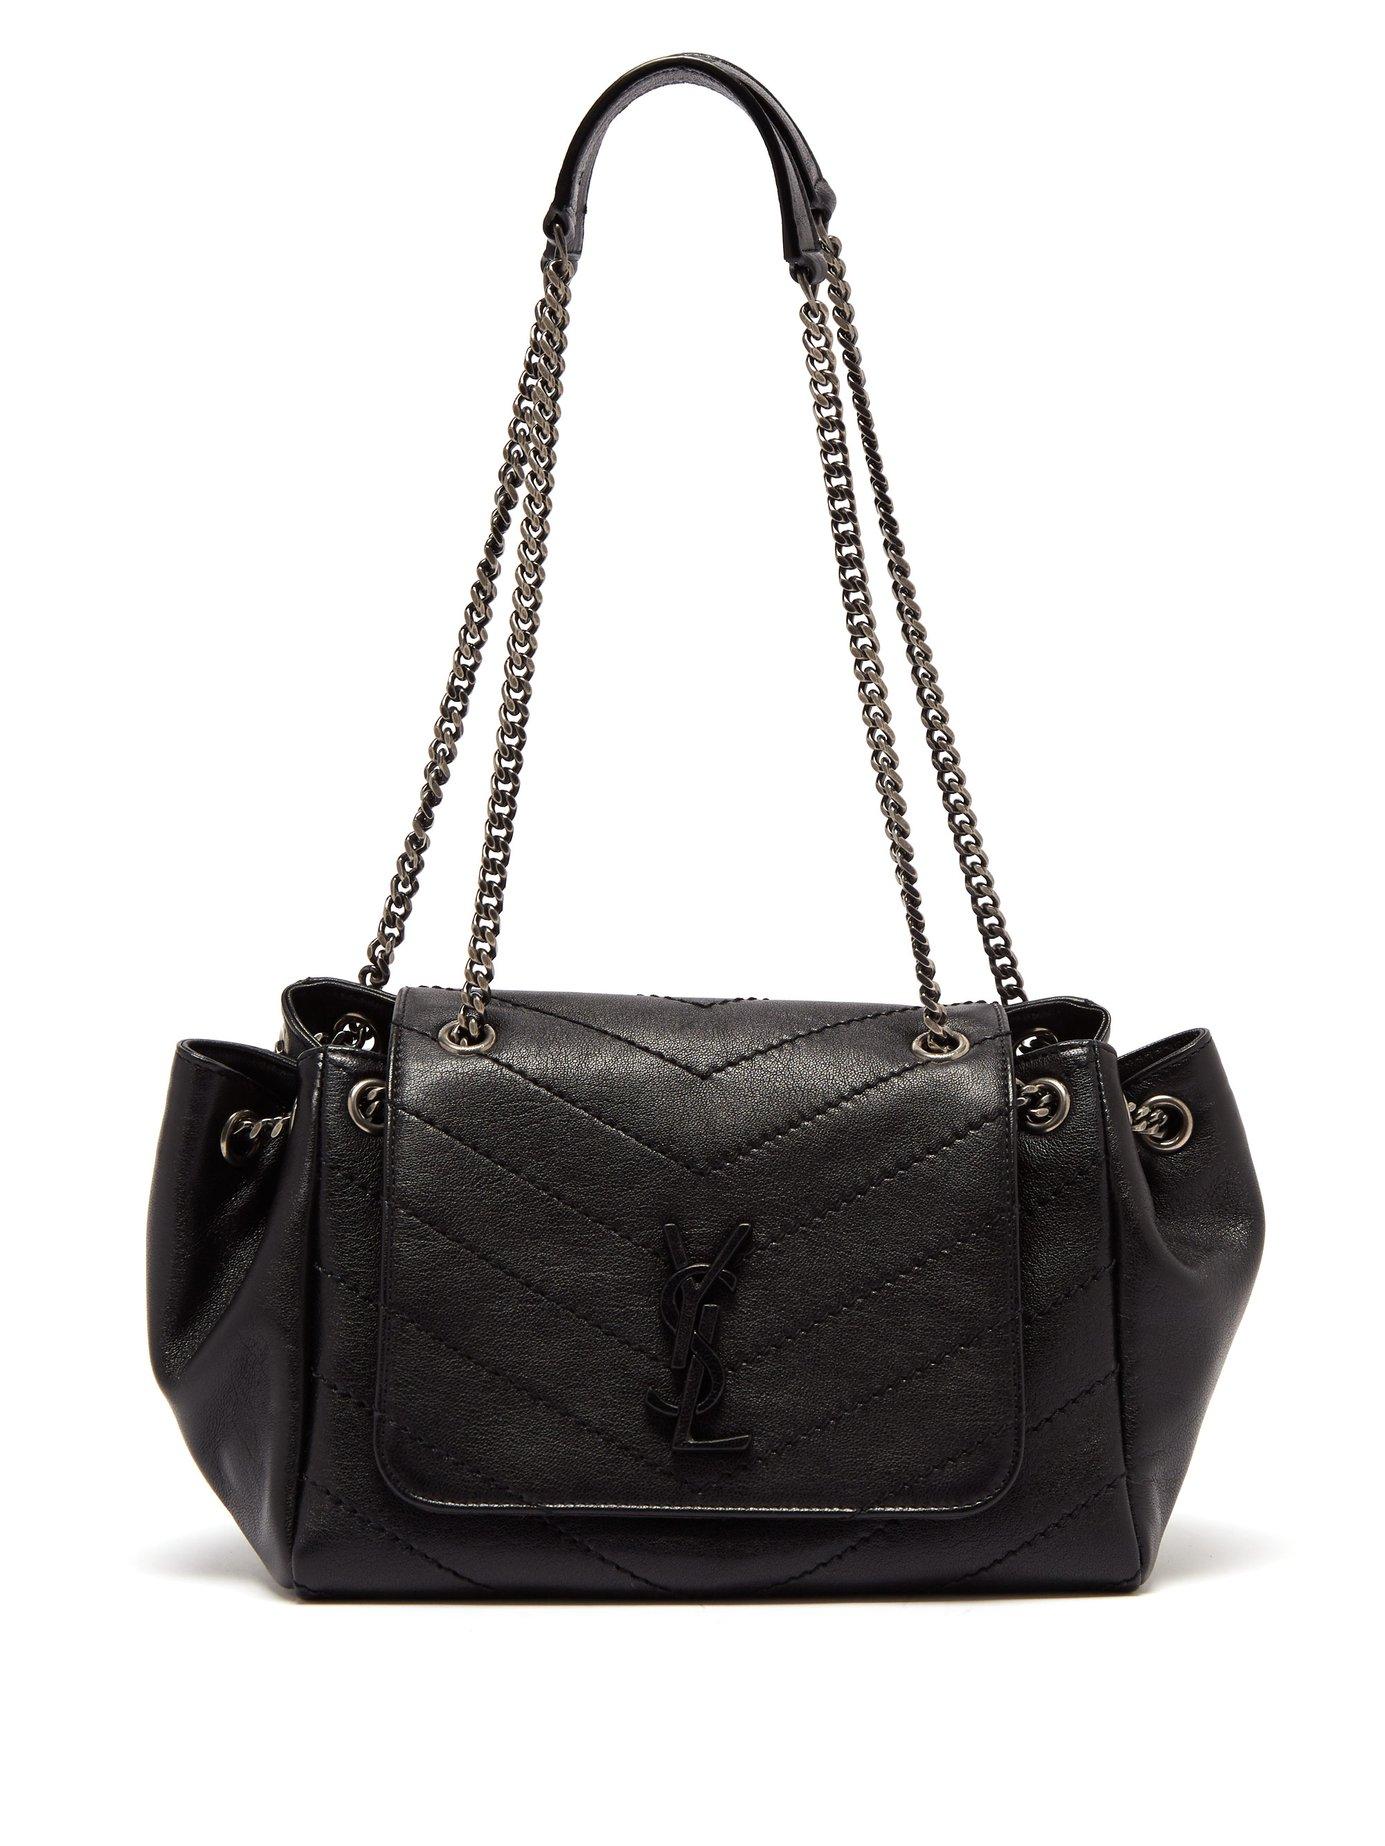 Saint Laurent Nolita Small Quilted Leather Bag in Black | Lyst